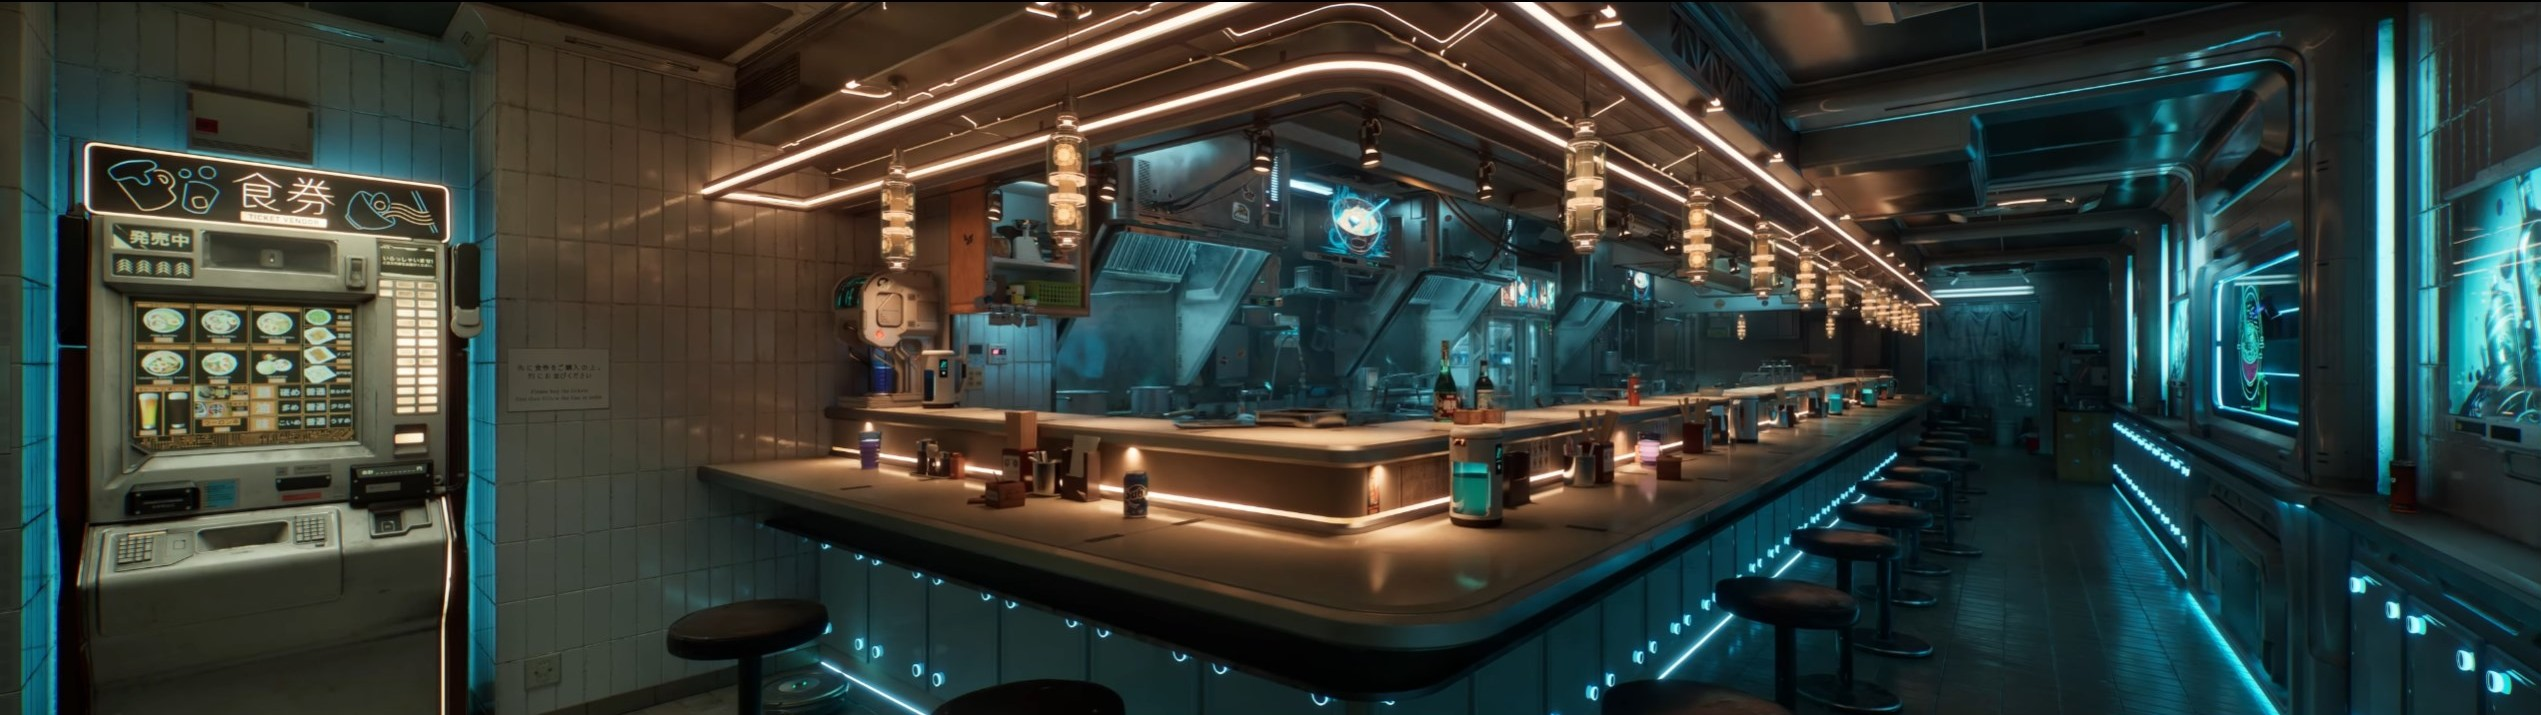 The visually stunning demo in Unreal Engine 5 with ray-tracing is overshadowing the lackluster chatbot aspect.